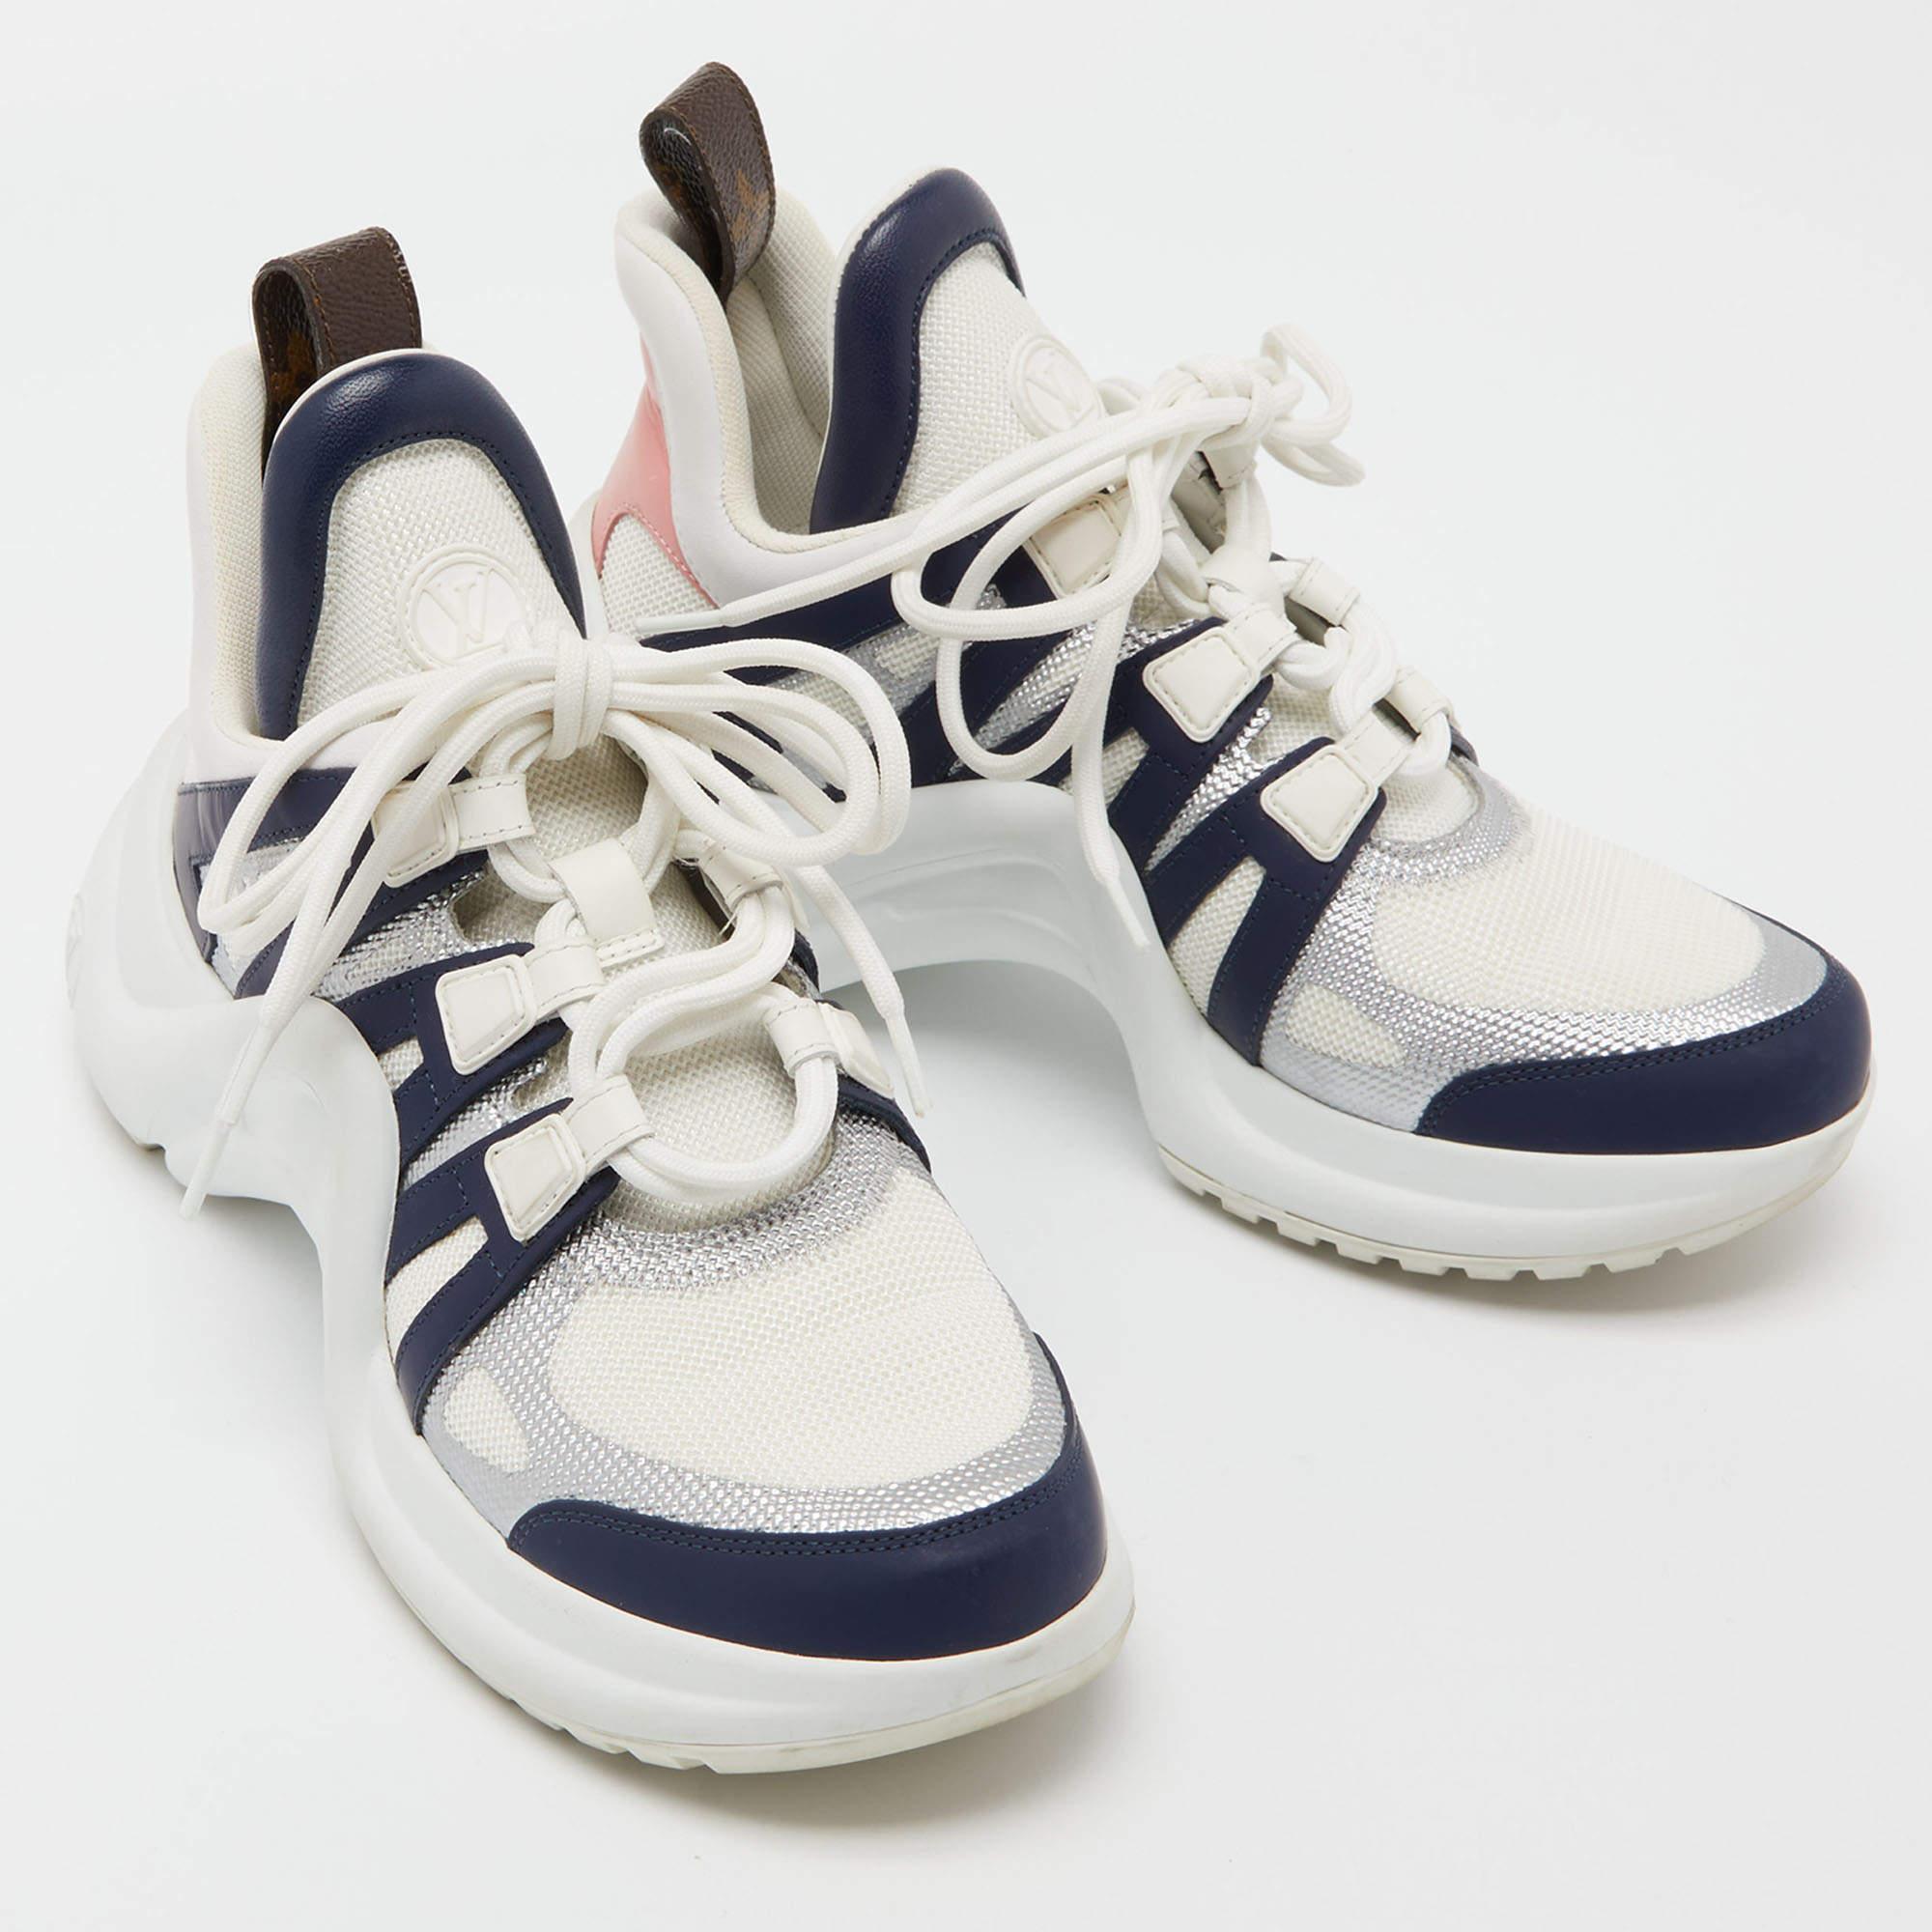 Women's Louis Vuitton Tricolor Leather and Mesh Archlight Sneakers 